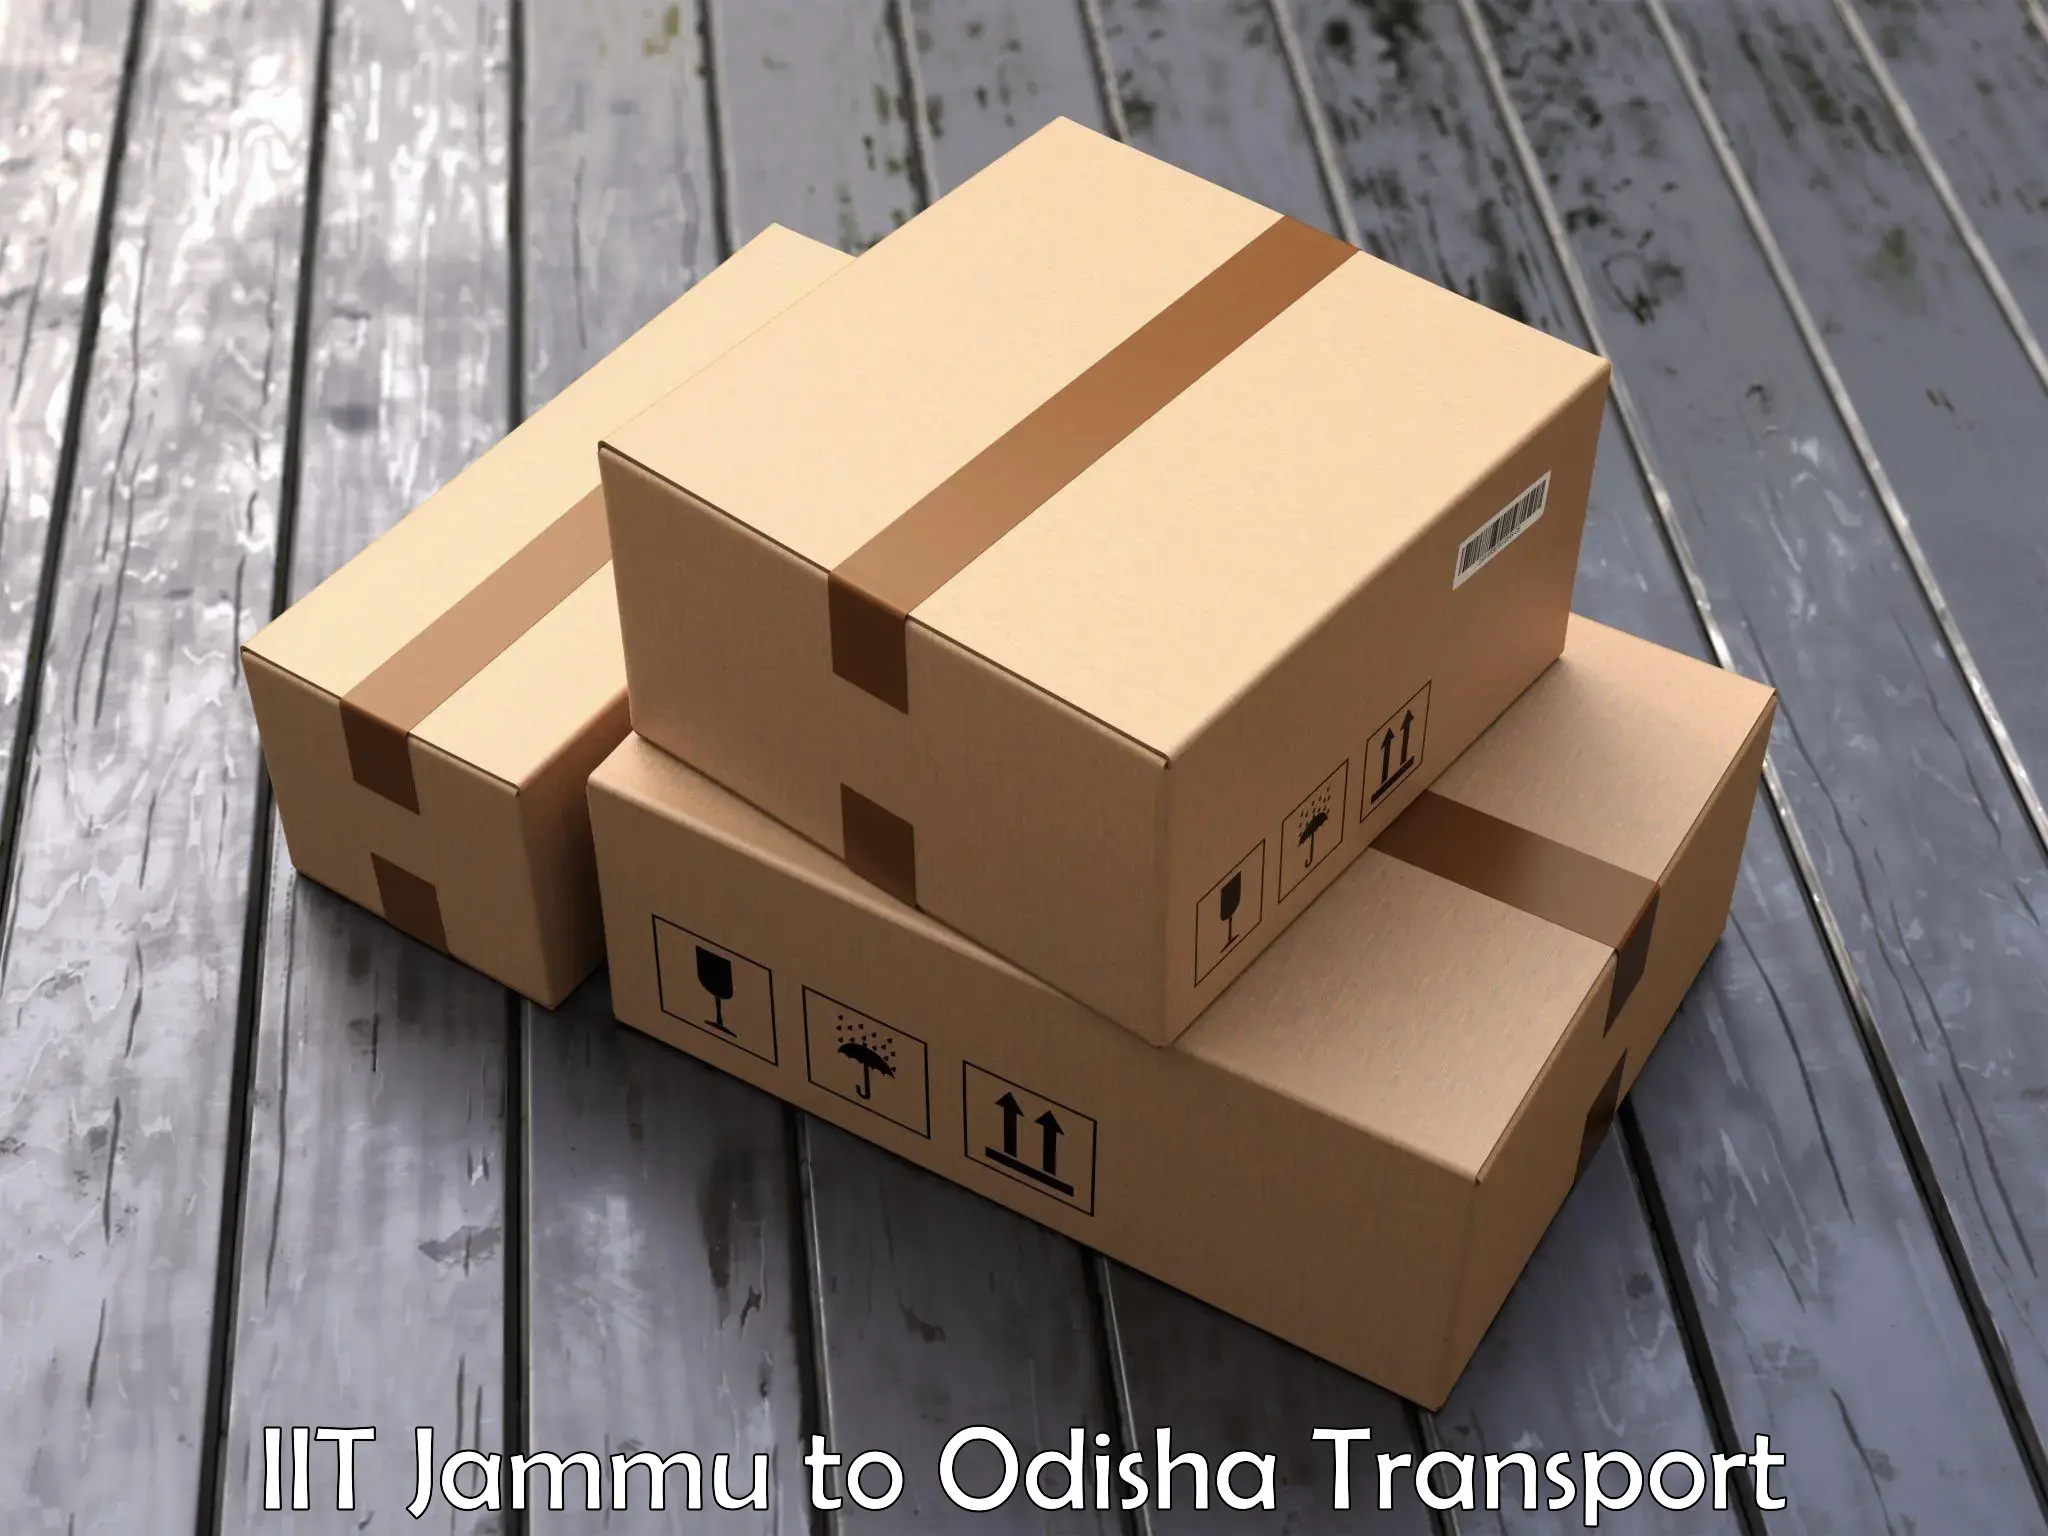 Land transport services in IIT Jammu to Jeypore